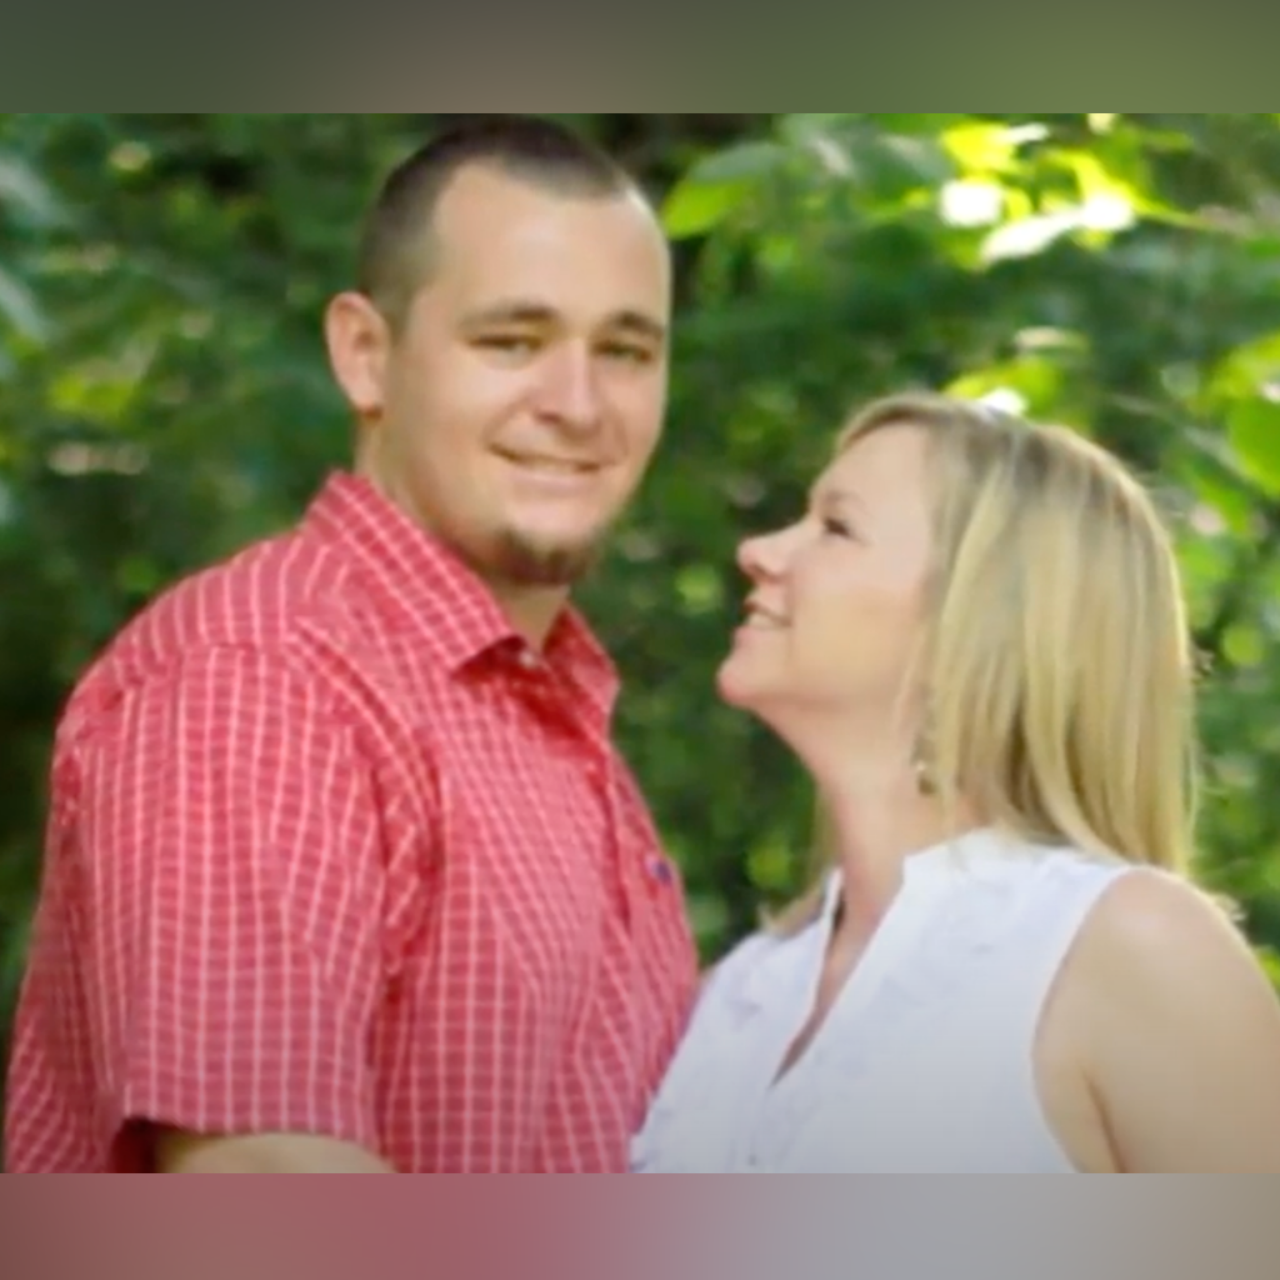 Kentucky Woman Kills Husband 4 Days After $1 Million Life Insurance Policy Became Active Shows Investigation Discovery